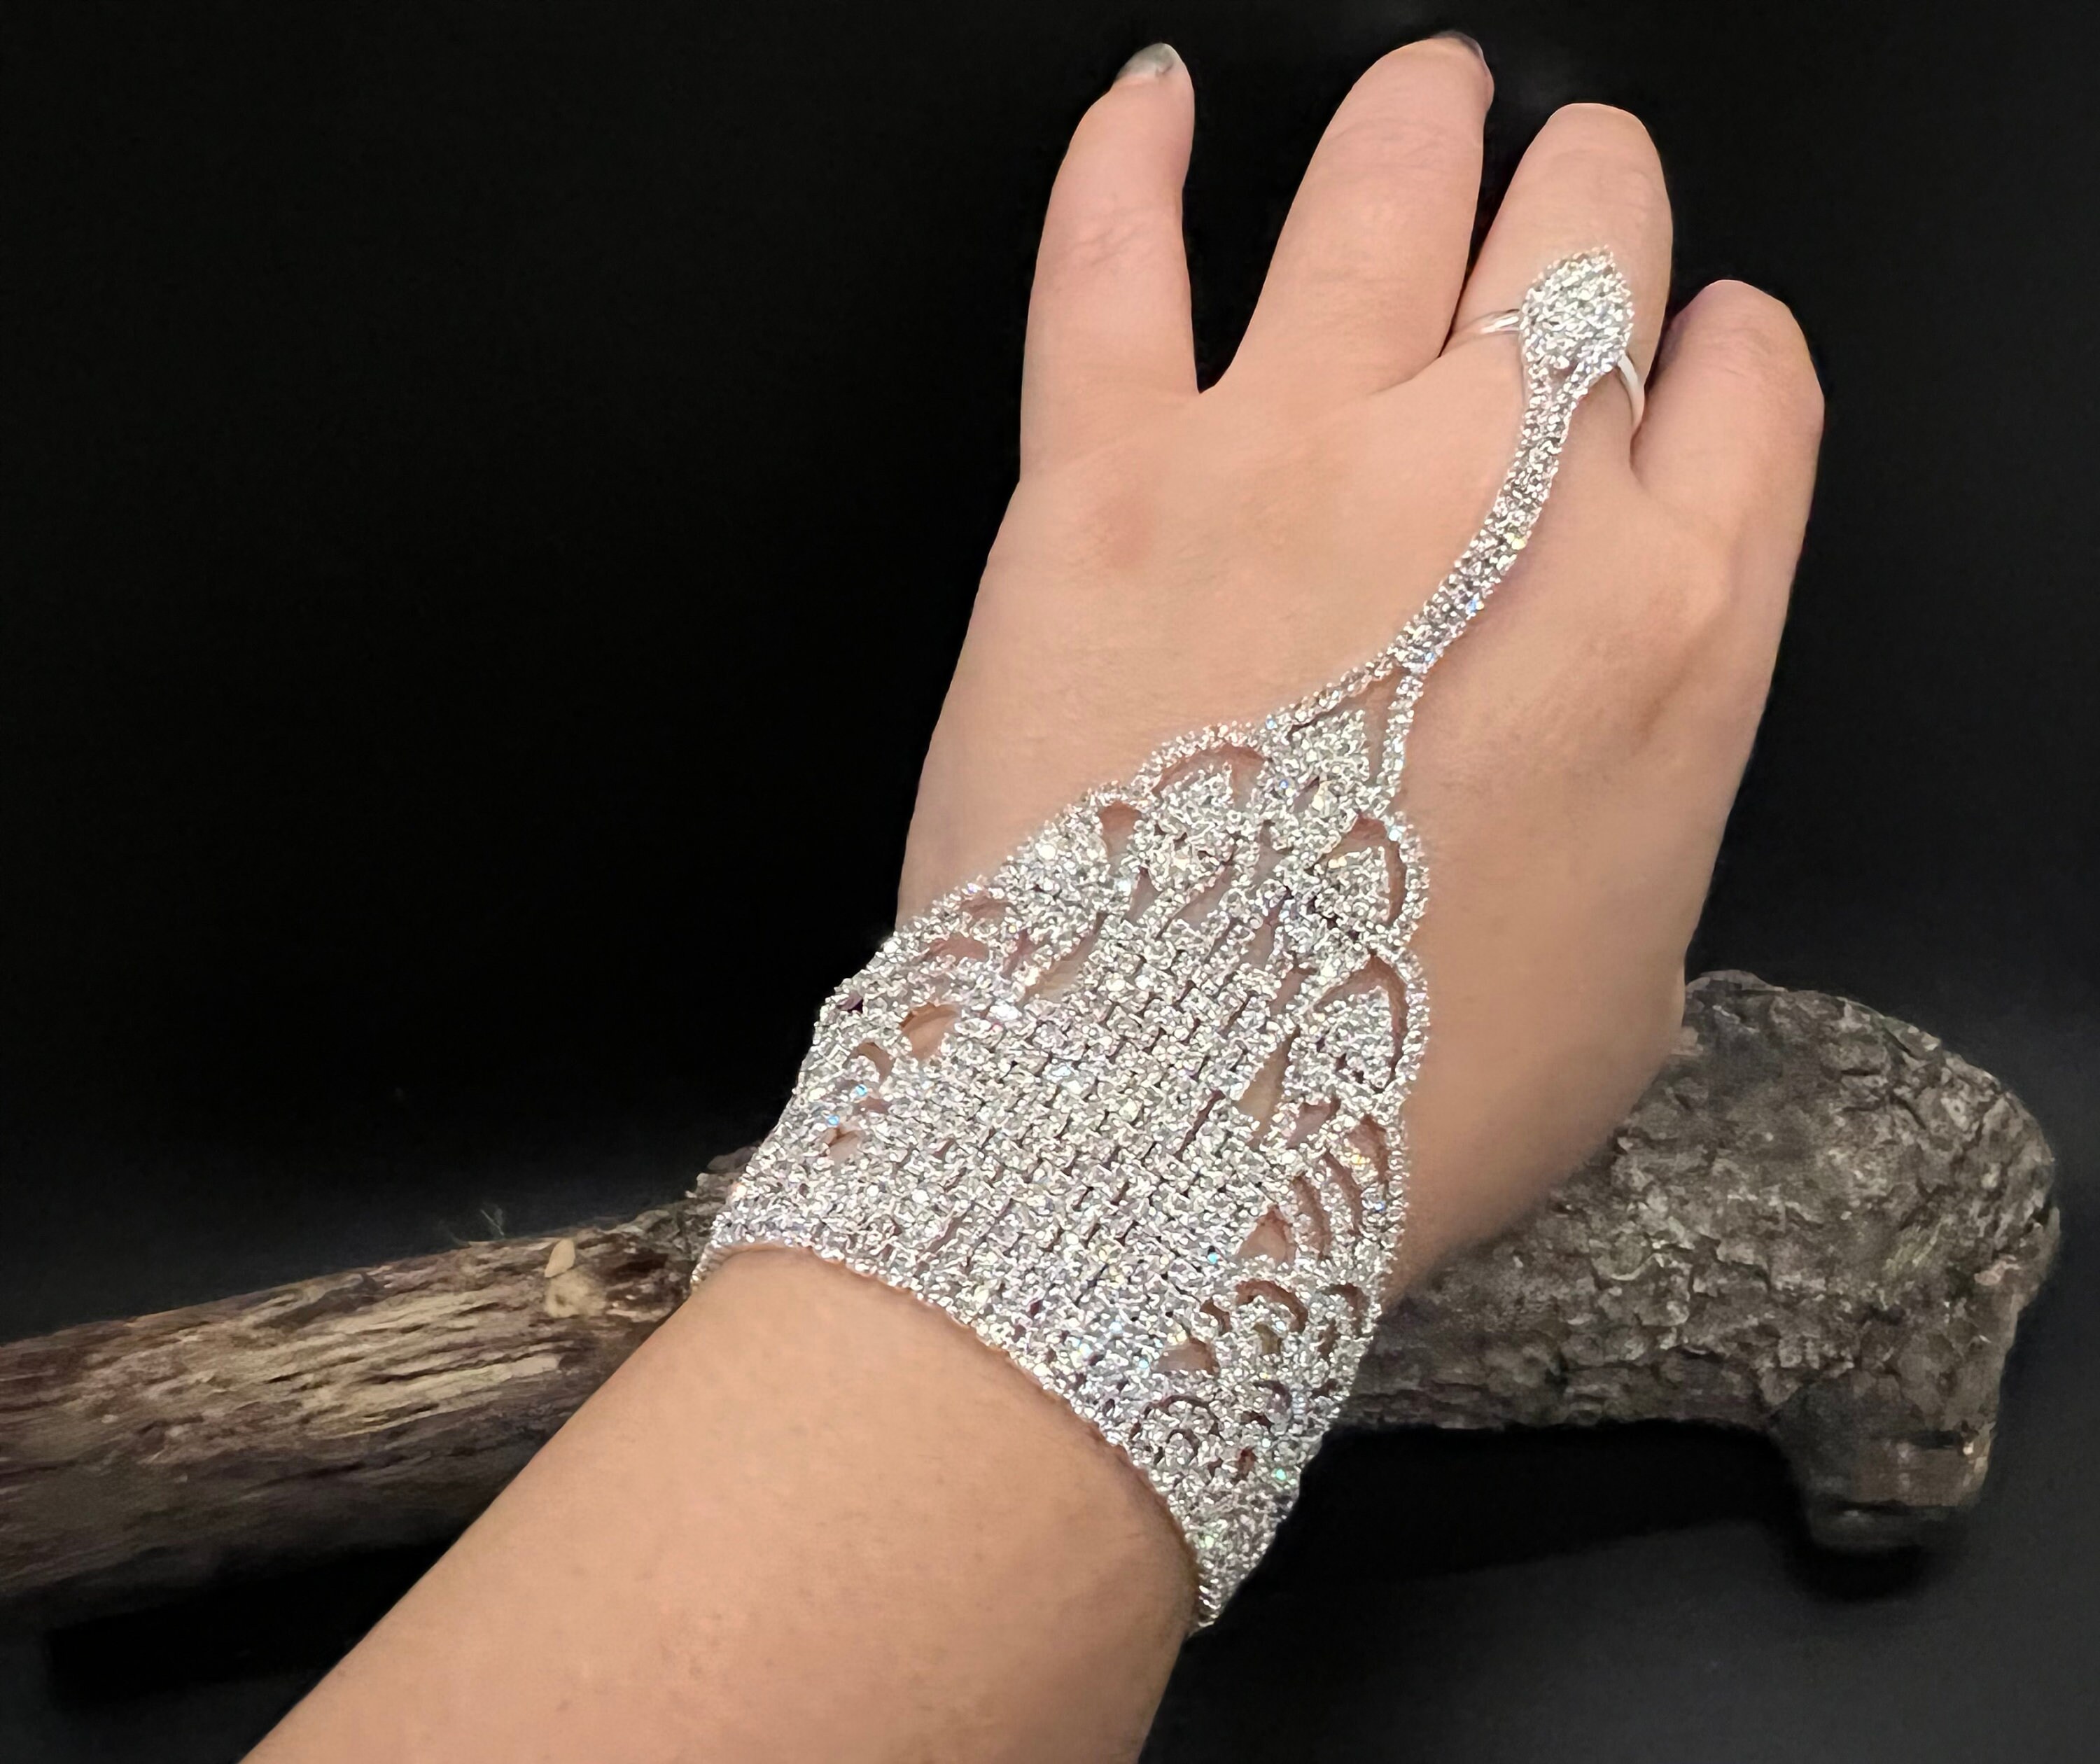 Rhinestone Crystal Chain Bracelet With Ring Perfect For Weddings, Parties,  Proms, And Beach Bridal Bridesmaid Jewelry Accessory From Nanna11, $34.44 |  DHgate.Com